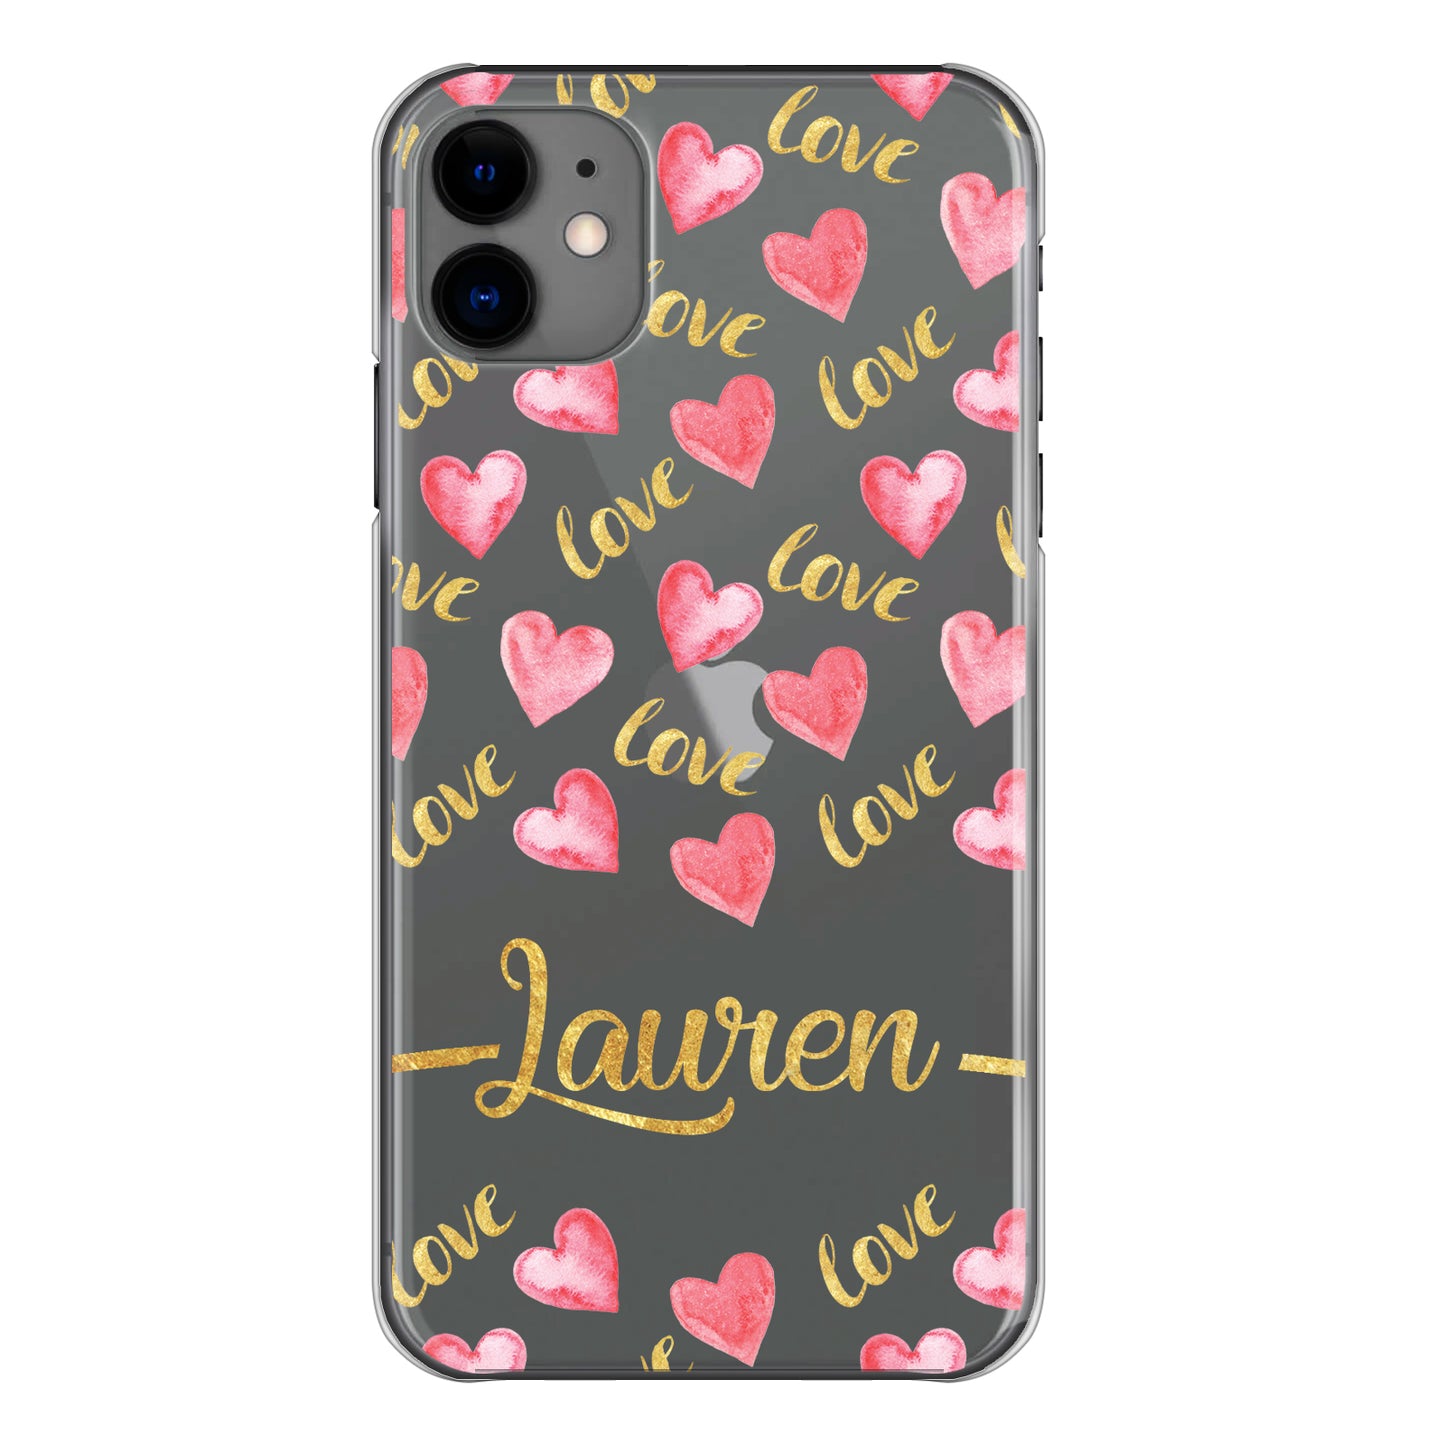 Personalised Motorola Phone Hard Case with Love Hearts and Cute Gold Text